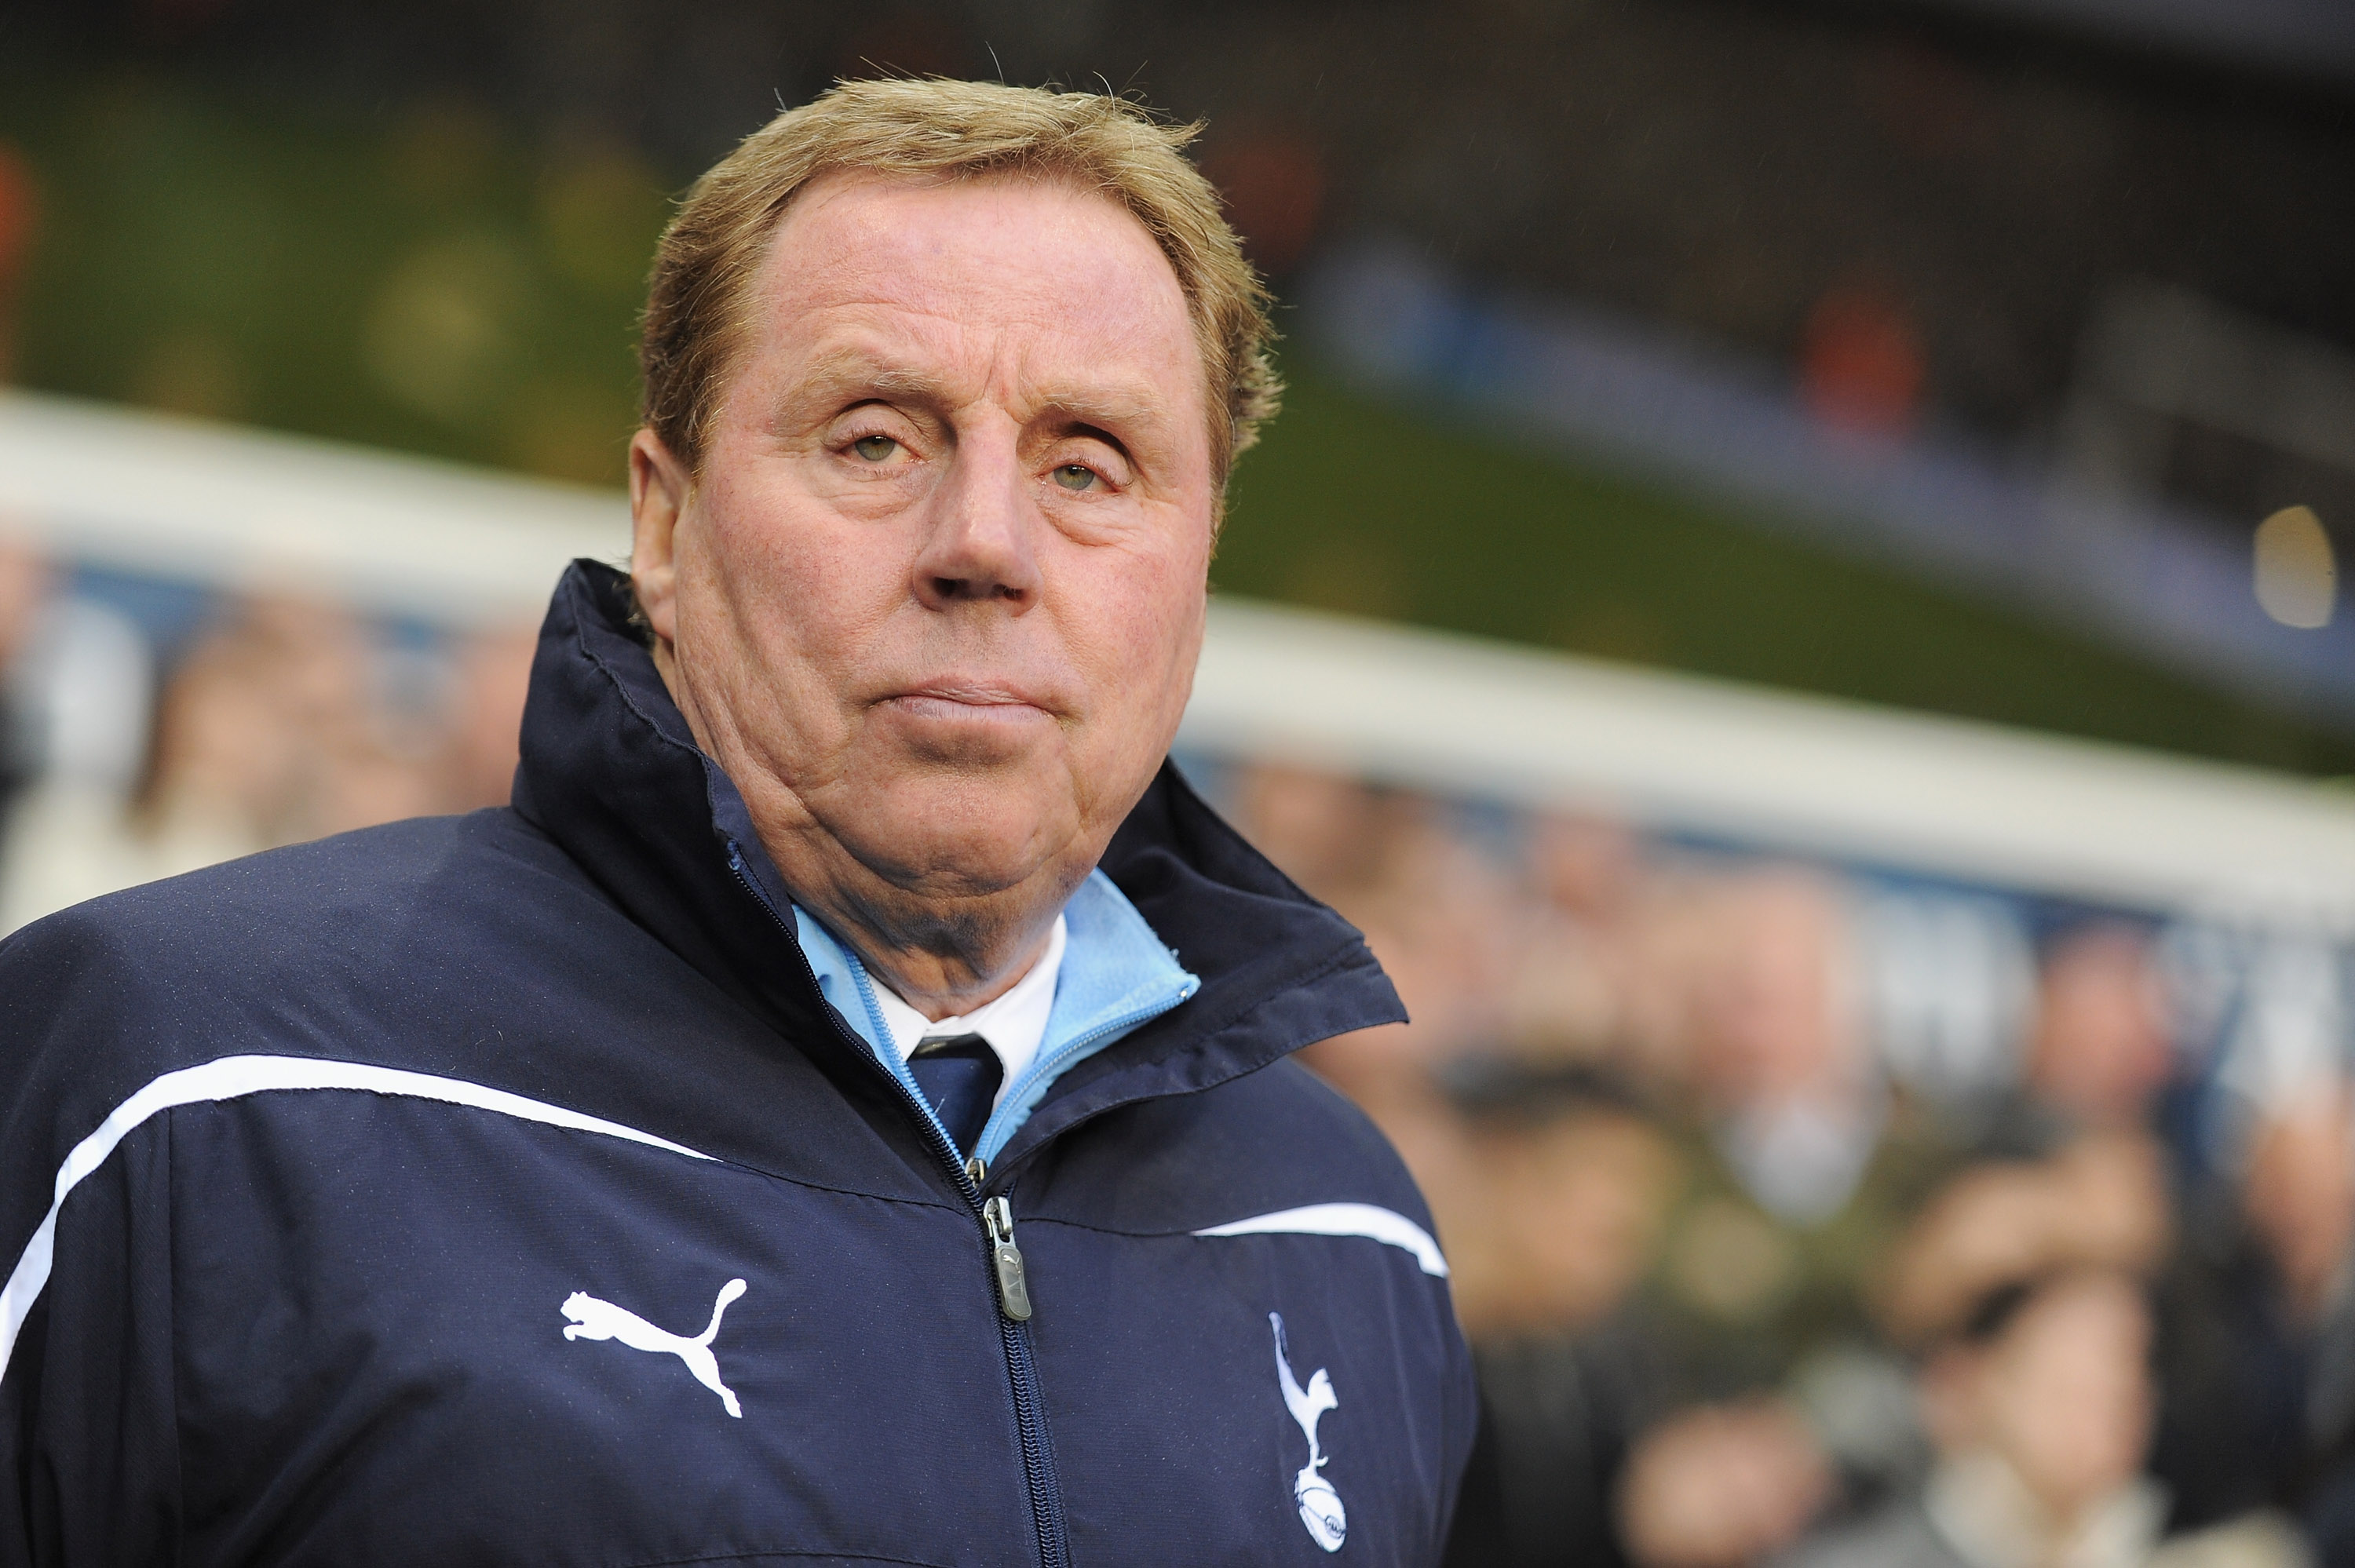 LONDON, ENGLAND - DECEMBER 28: Harry Redknapp, manager of Tottenham Hotspur looks on during the Barclays Premier League match between Tottenham Hotspur and Newcastle United at White Hart Lane on December 28, 2010 in London, England.  (Photo by Michael Reg